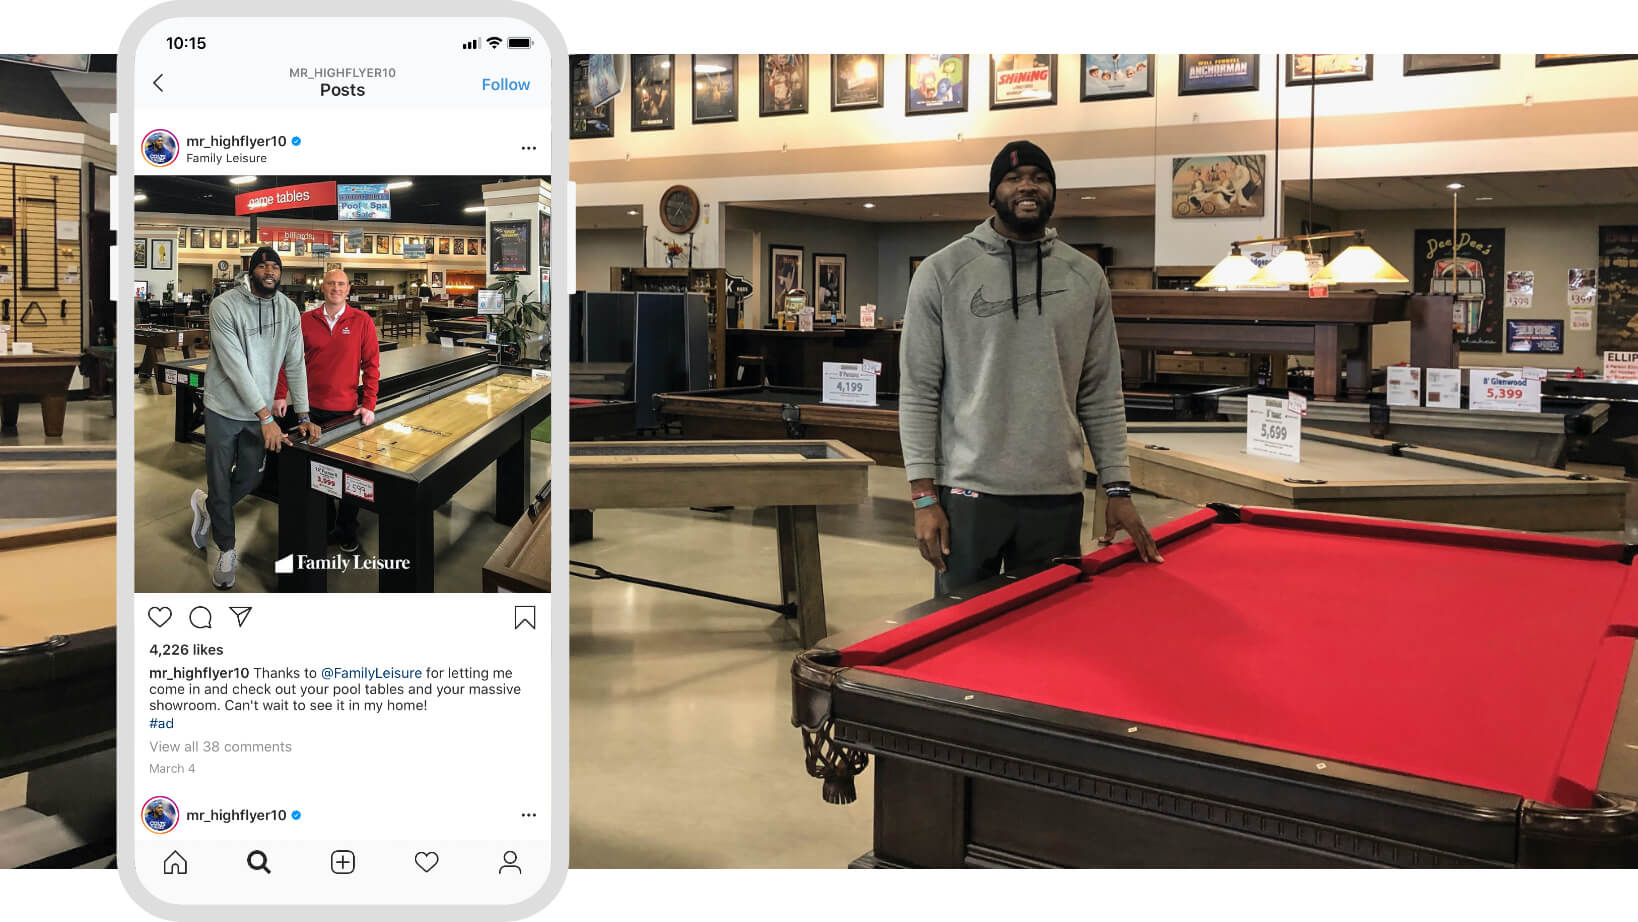 Family Leisure Social Media Engagement with Colts Players